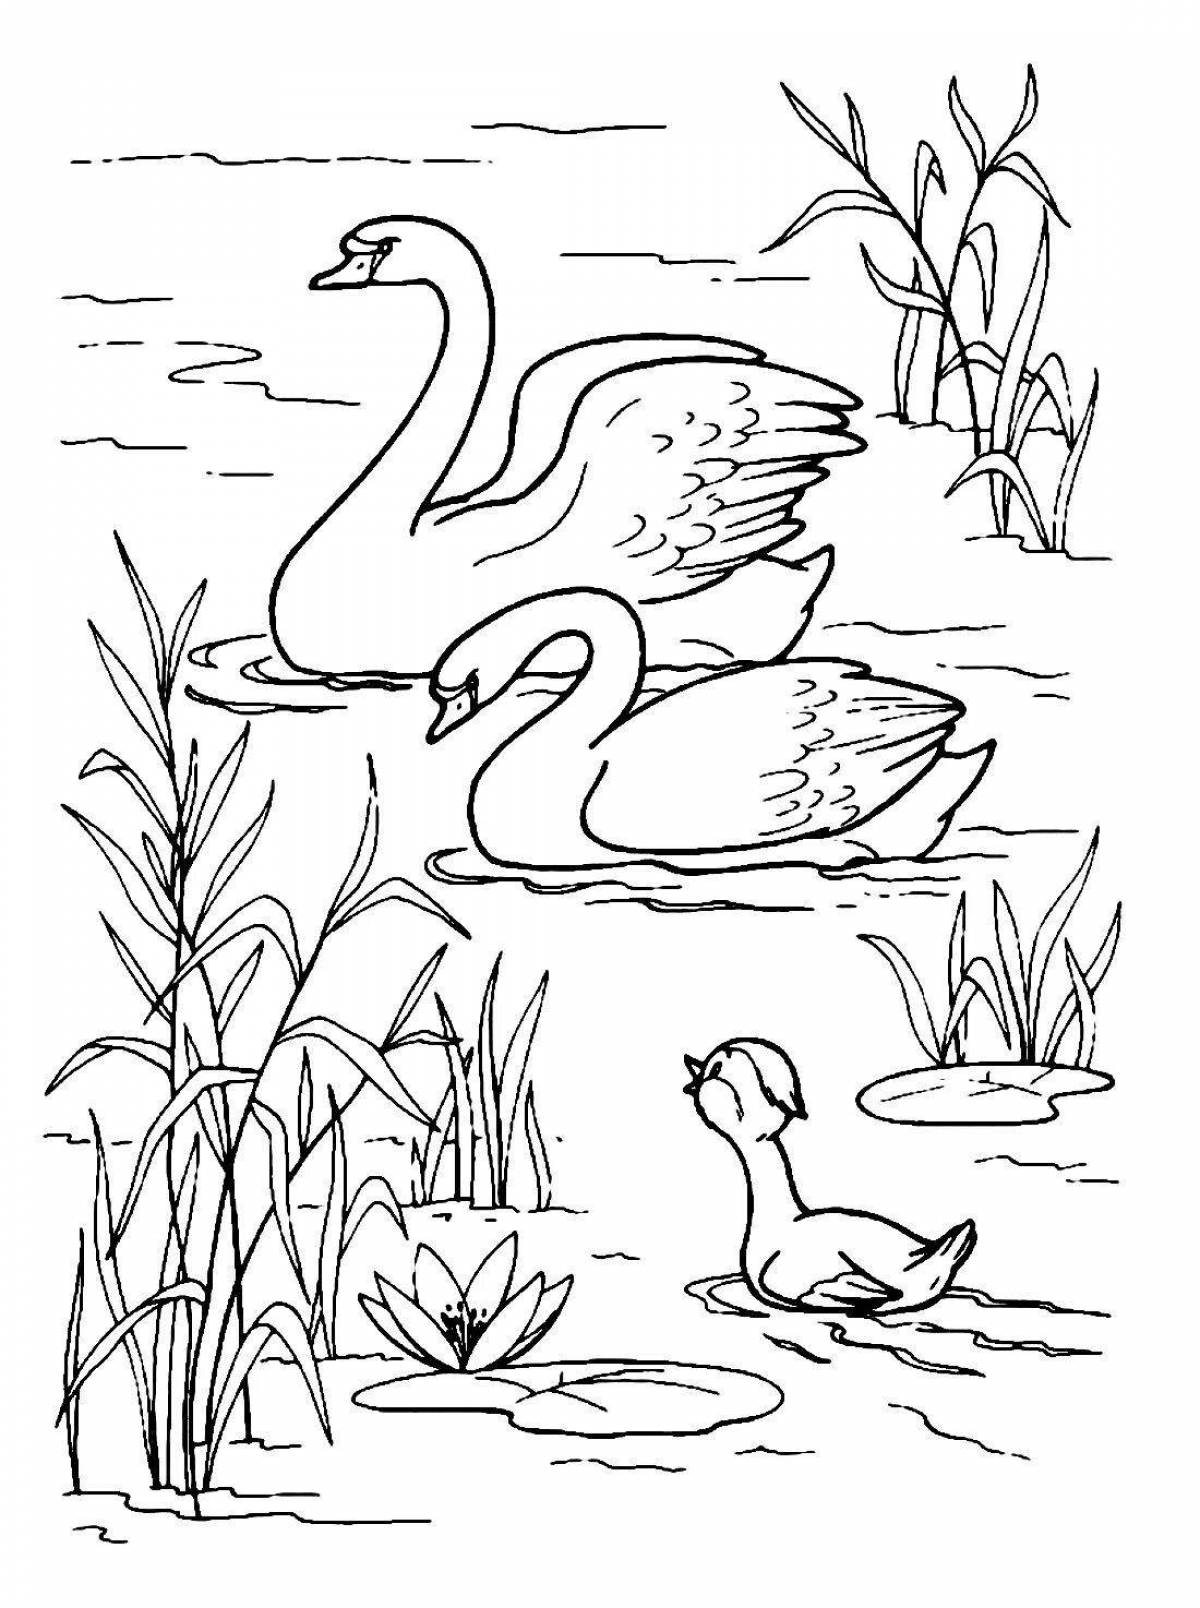 Great swan lake coloring book for little ones